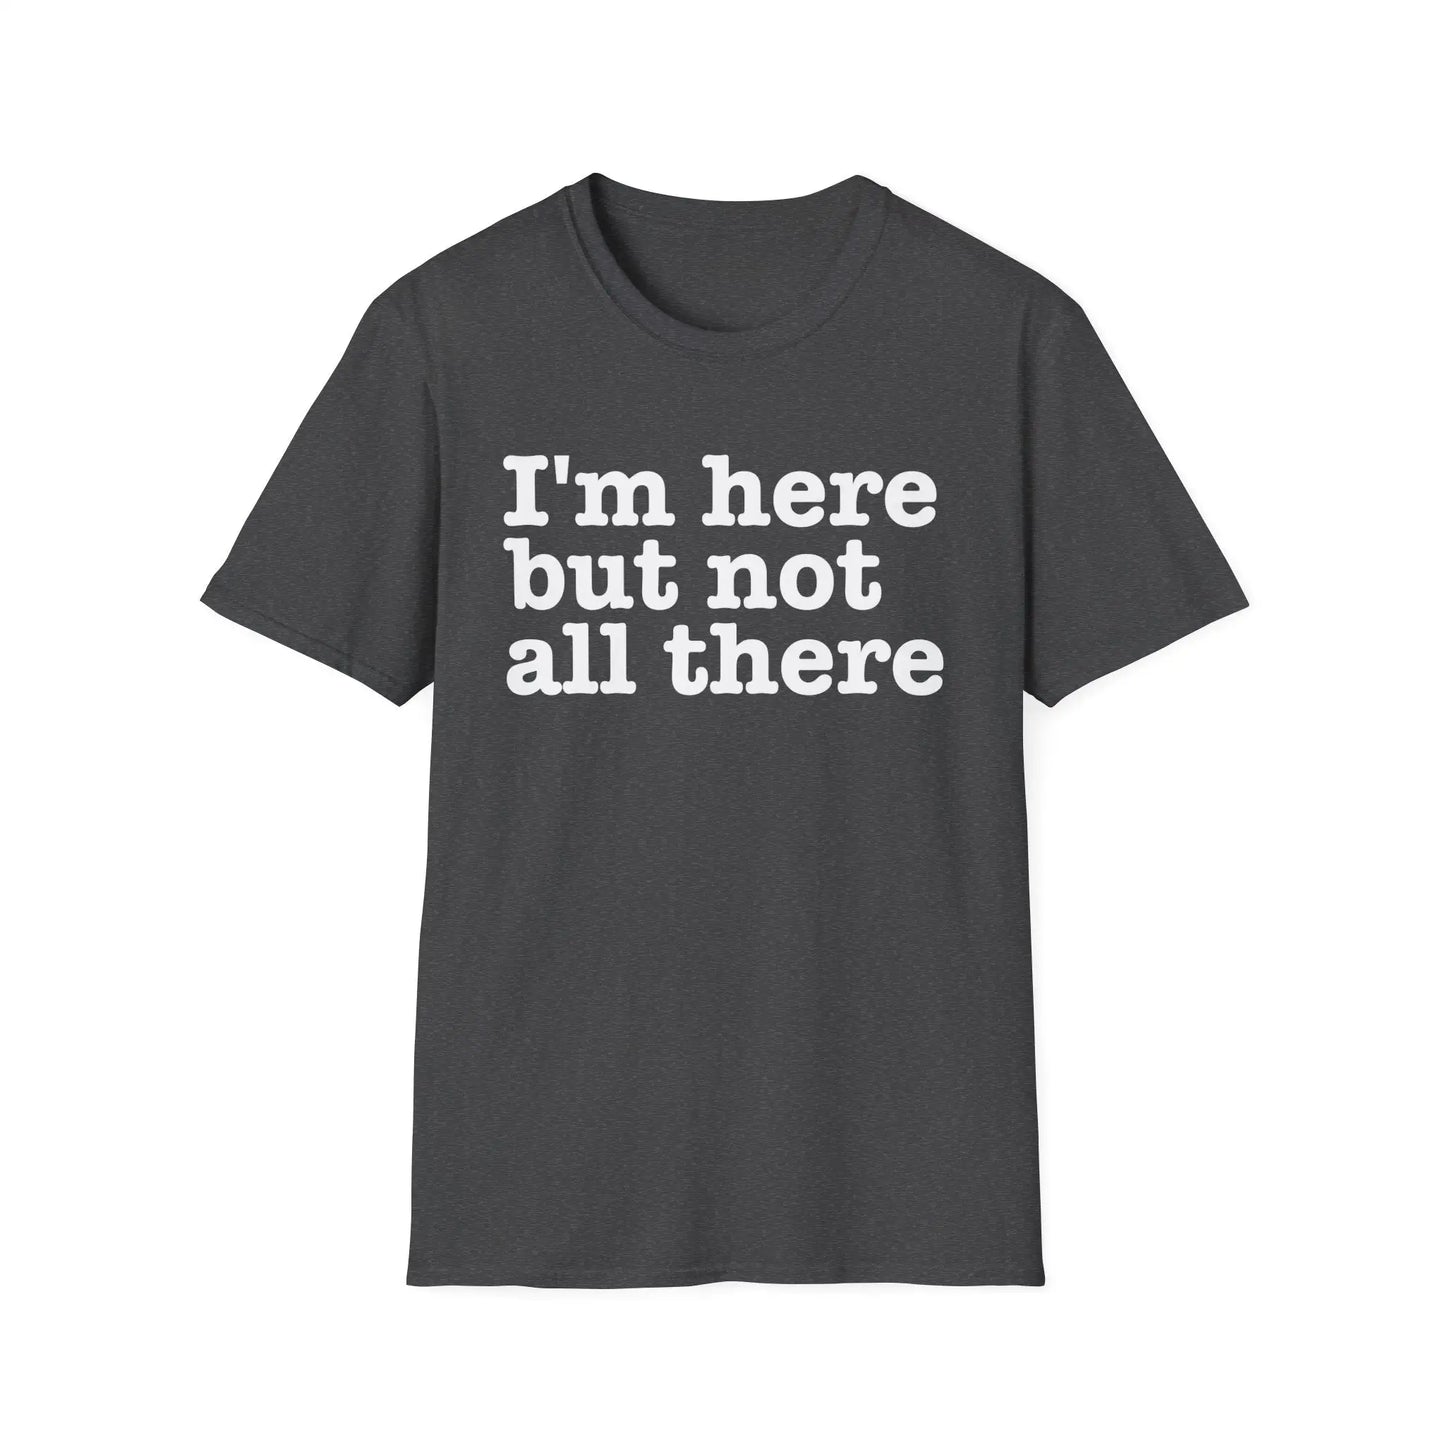 I'm Here But Not All There Women's T-Shirt - Wicked Tees